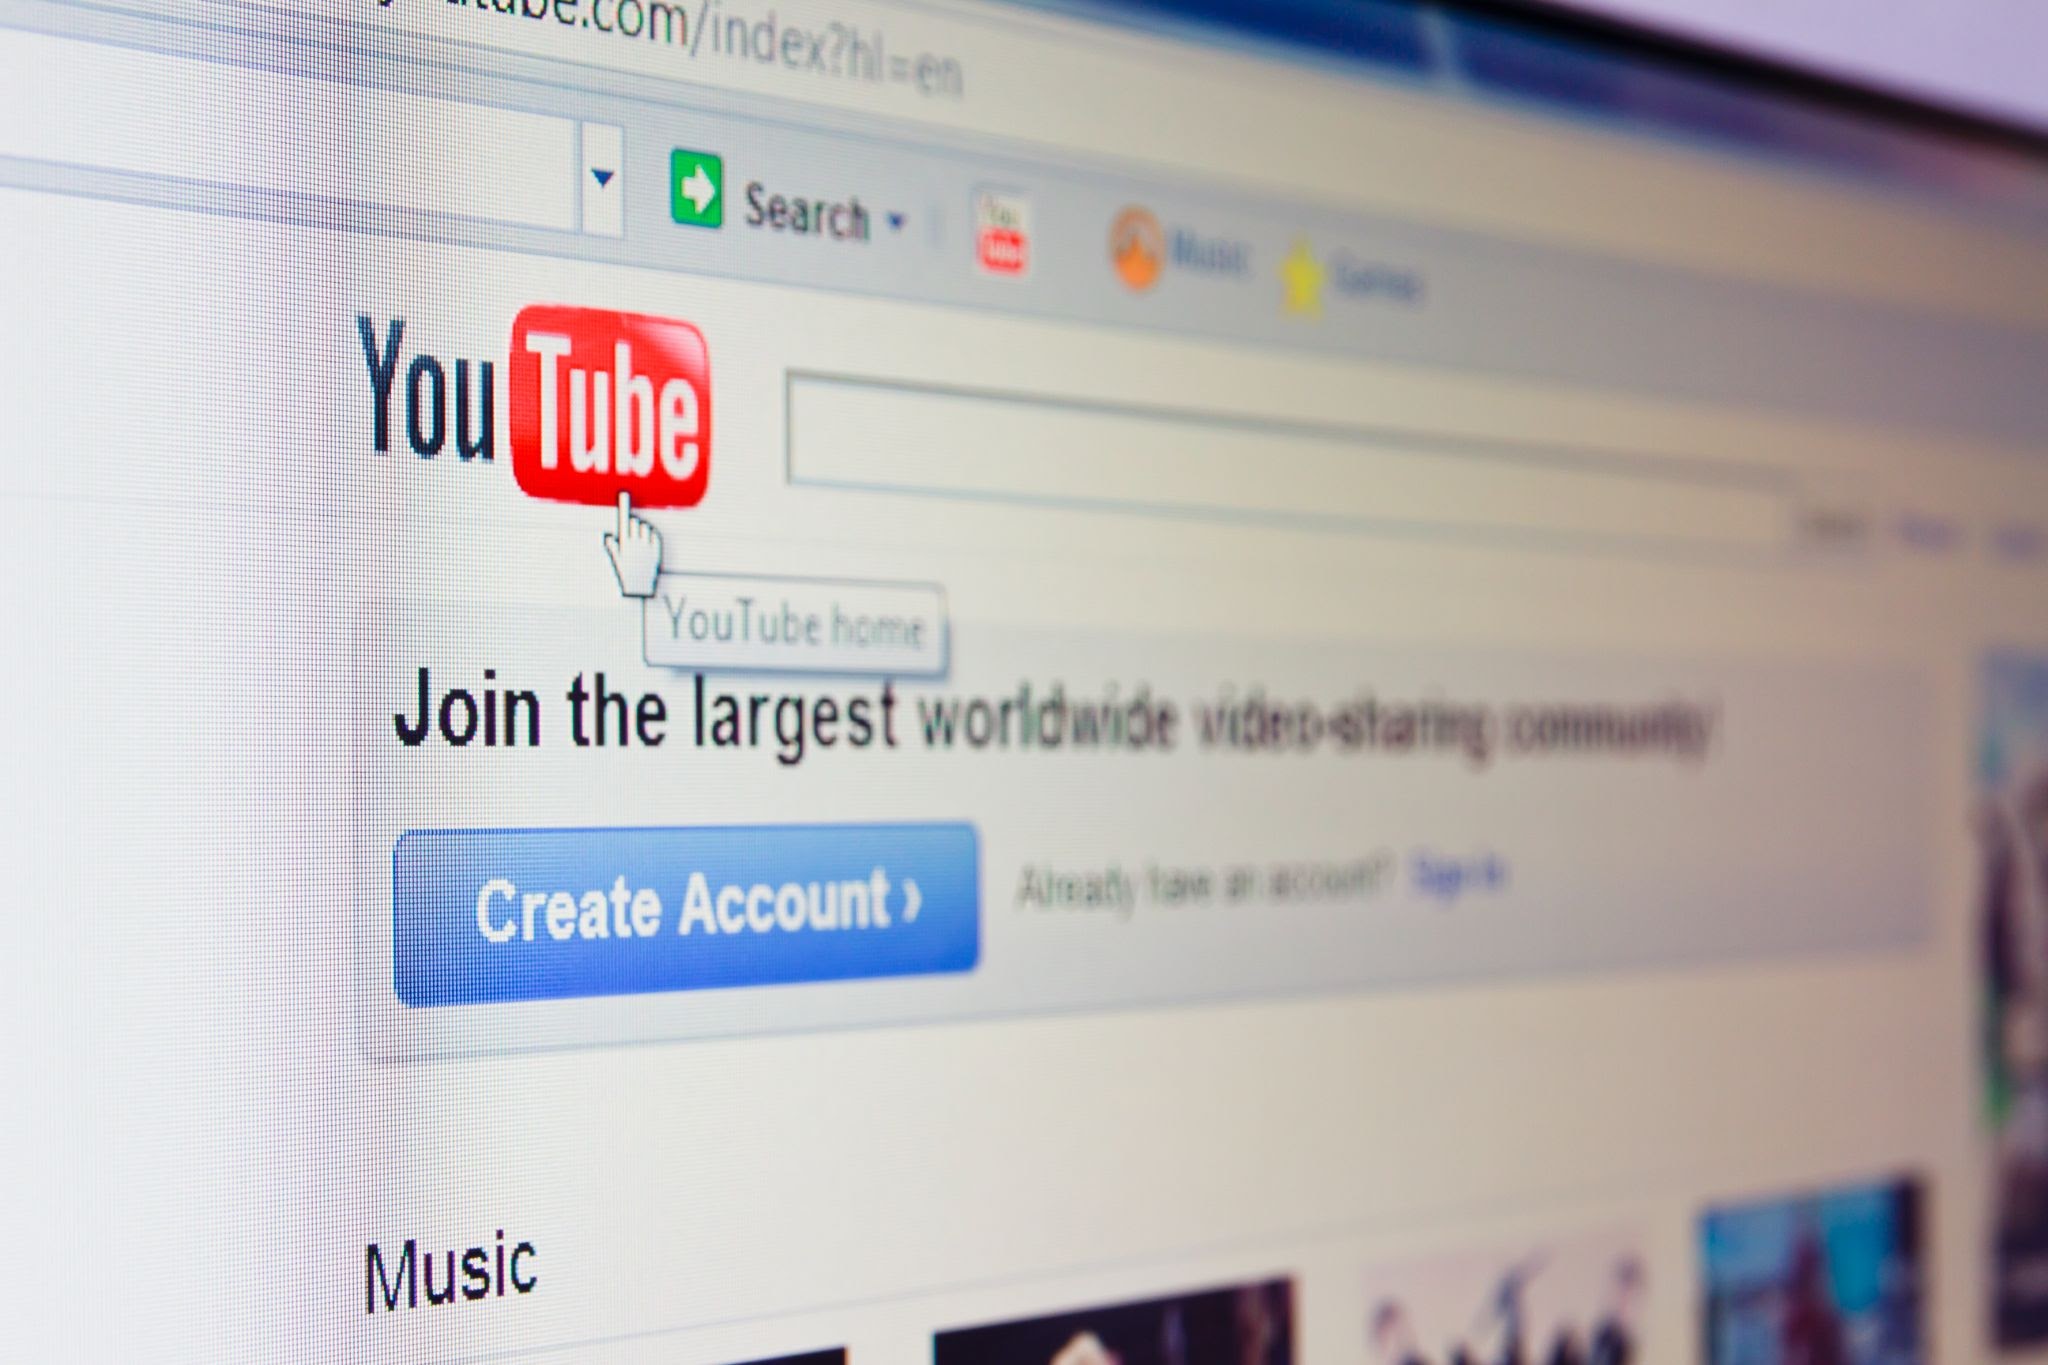 How to drive traffic to your website: Create content on YouTube.